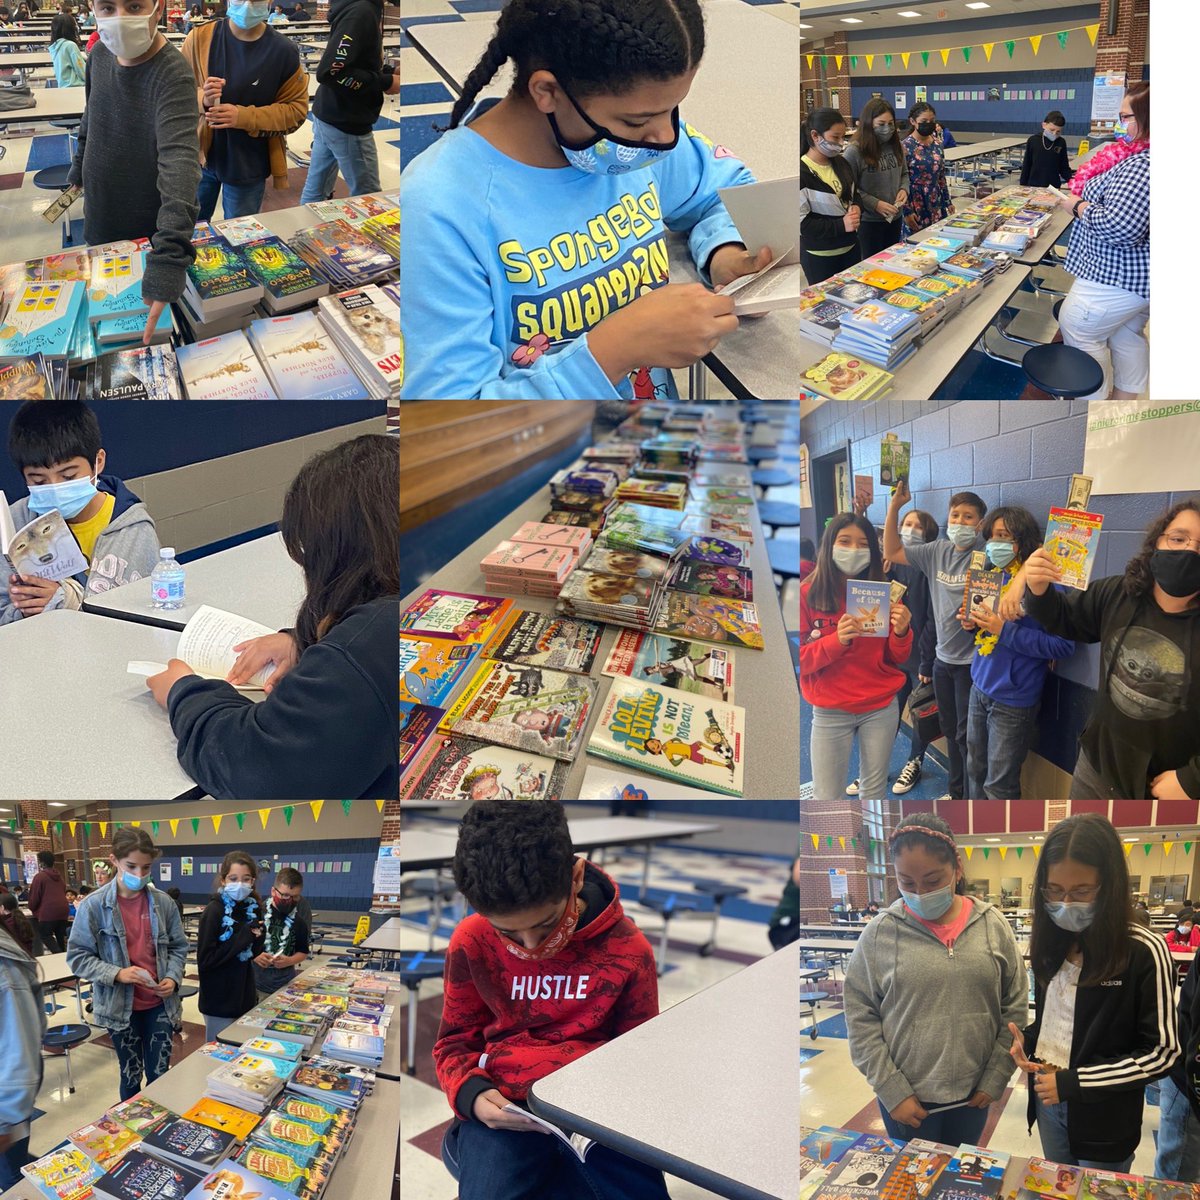 Rounding out #FreeReadJamboree week- every Lion picked a book of their choice. The reading excitement is contagious! #ReadersAreLeaders